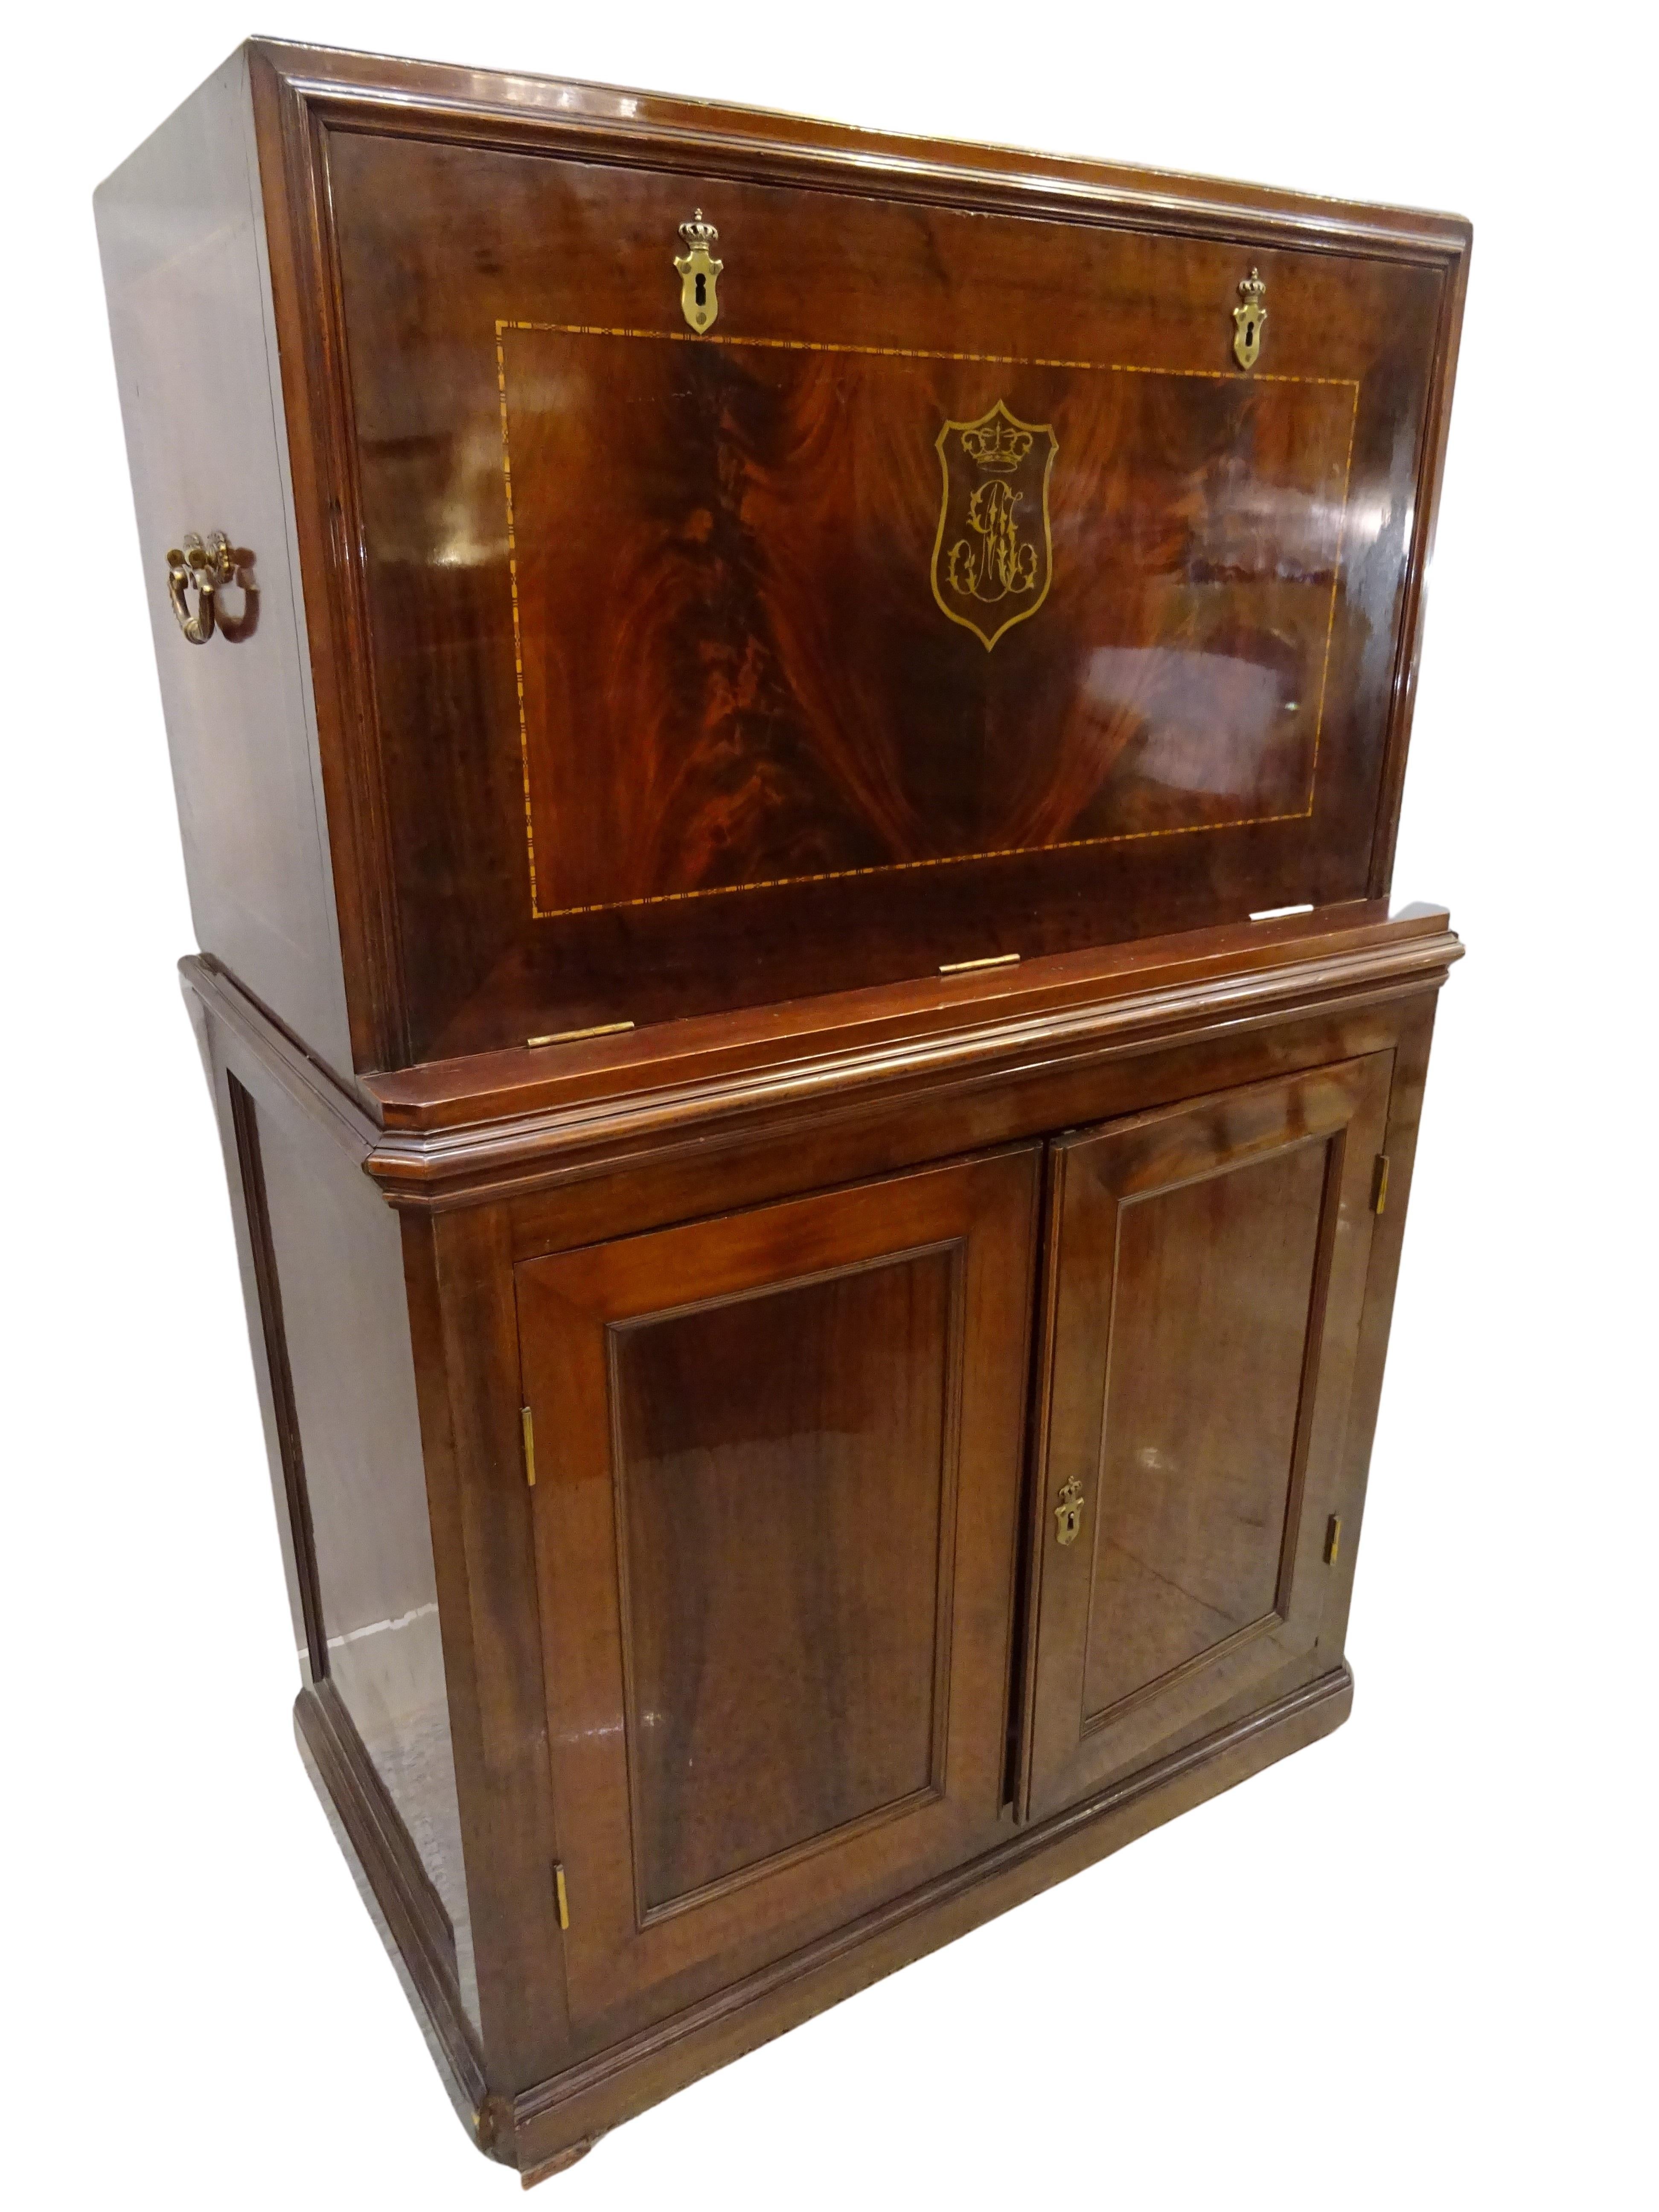 Outstanding and extraordinary piece of furniture!!! Cabinet in solid wood and bronces with the real Spanish crown and brass initials inlaid of Dº Juan de Borbon y Battenberg and Dª María ,and framed in the royal crown. It has two parts, top with a